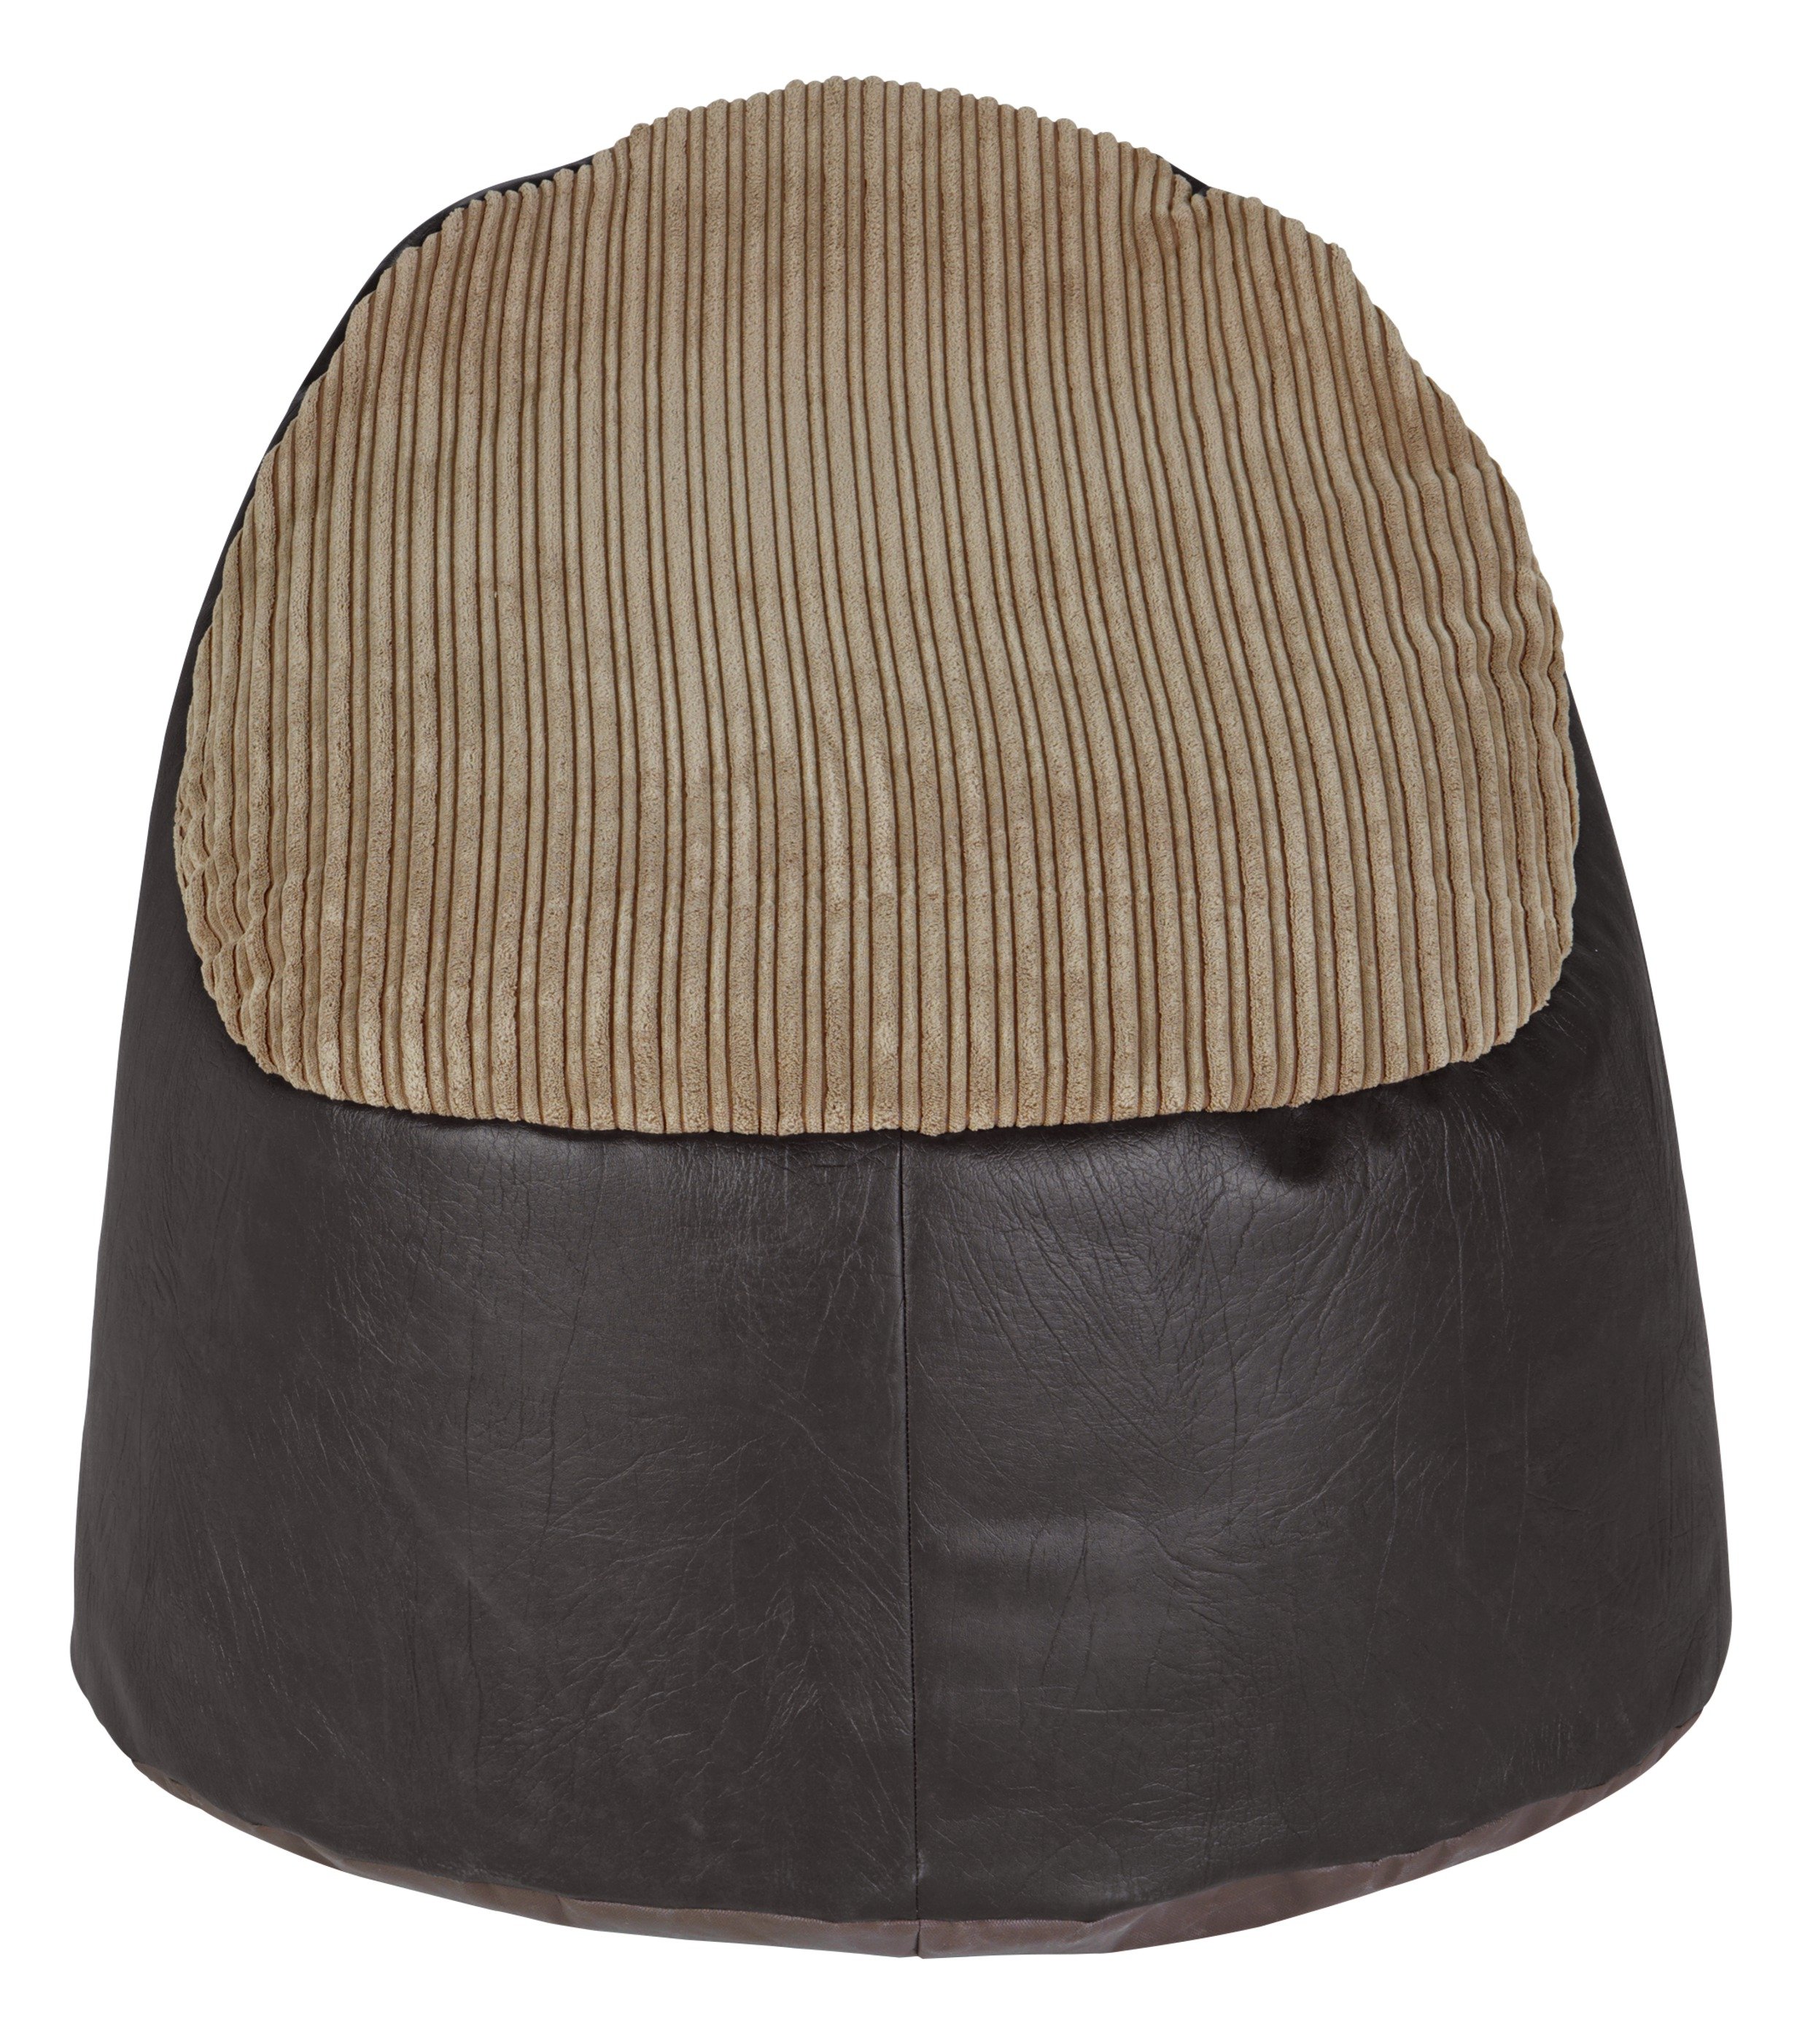 HOME Harley Fabric and Leather Effect Beanbag - Natural.